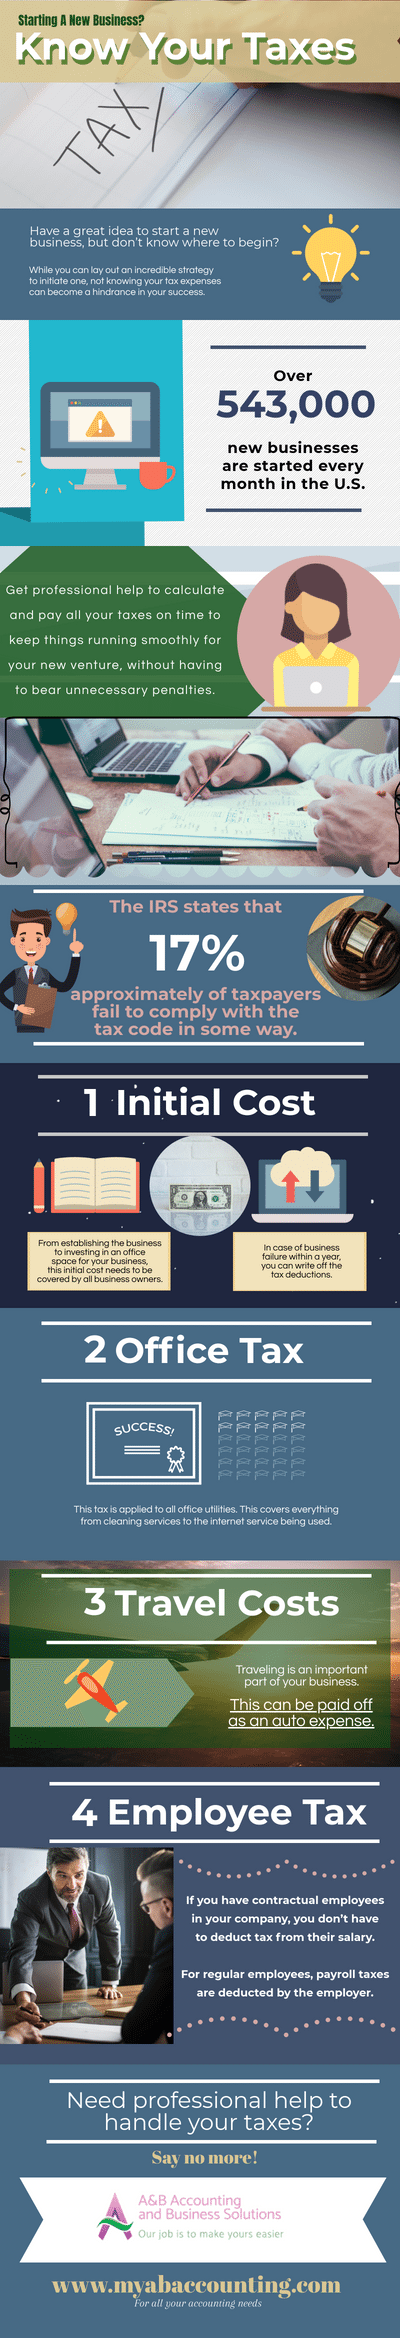 know your taxes